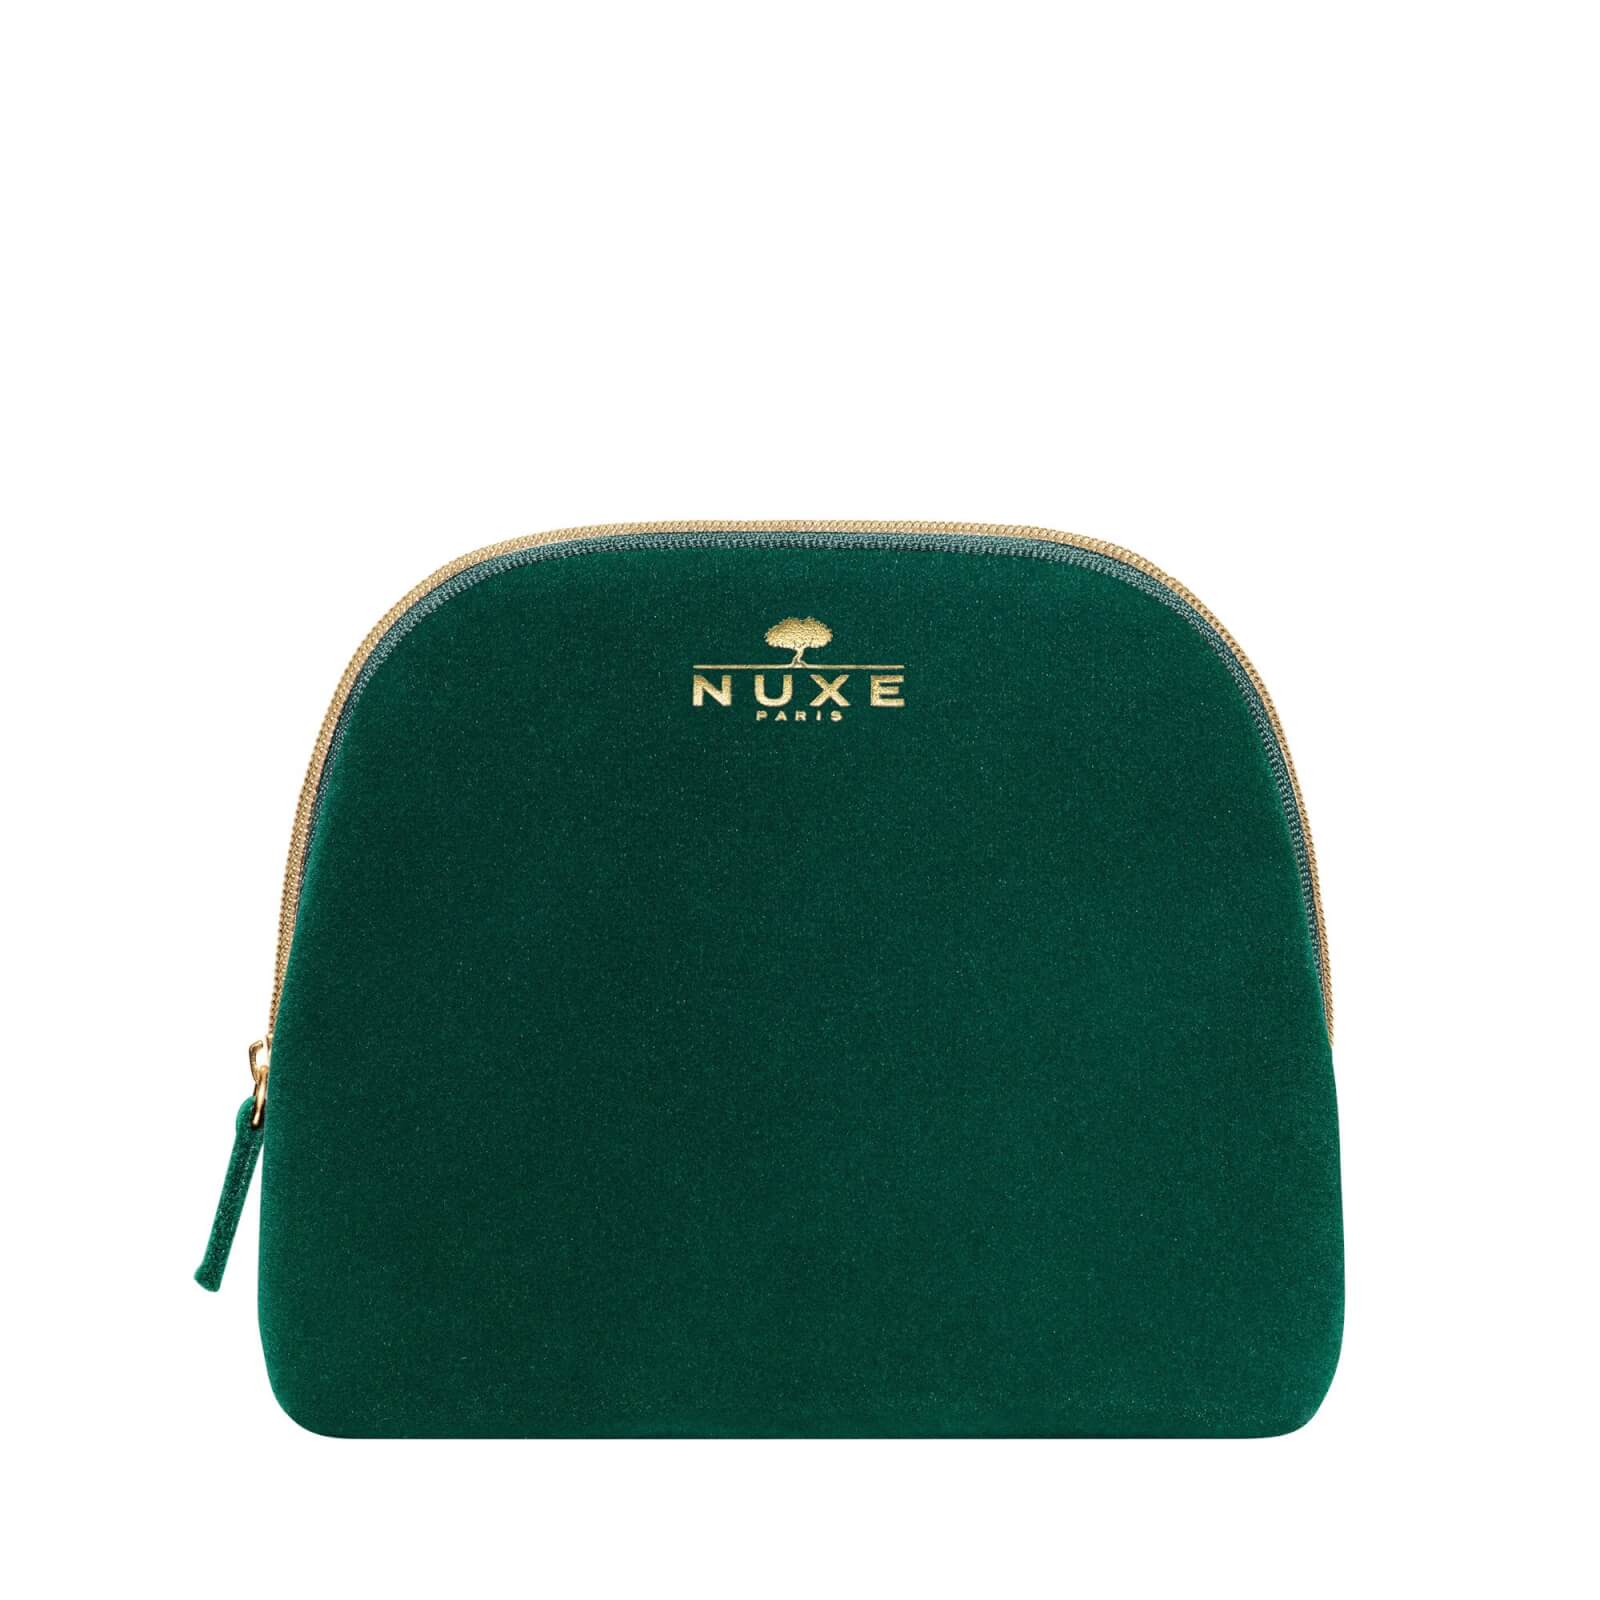 NUXE Small Green Velvet Pouch